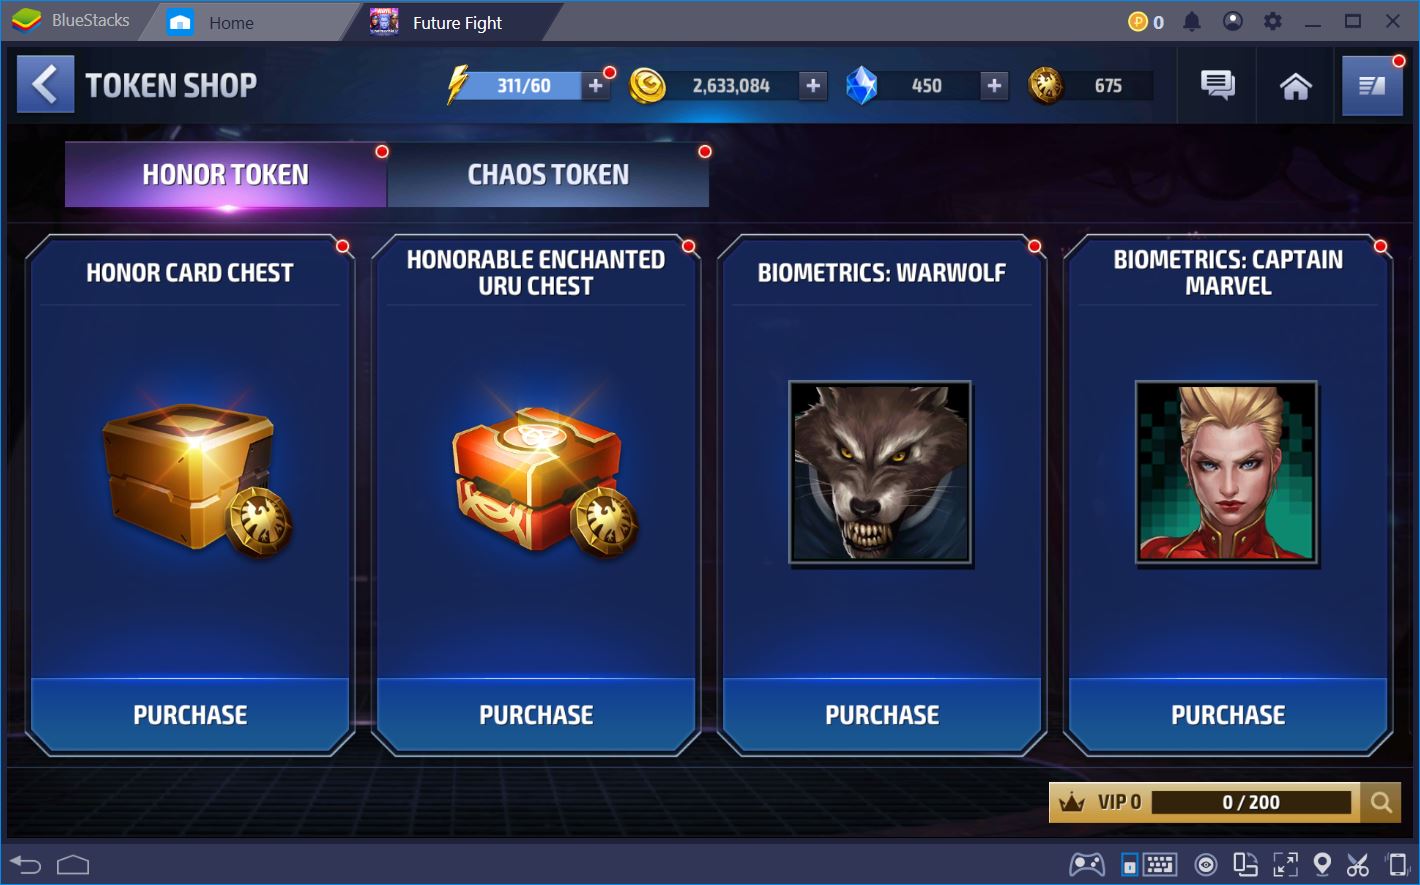 Marvel Future Fight: Where to Get More Heroes for Free